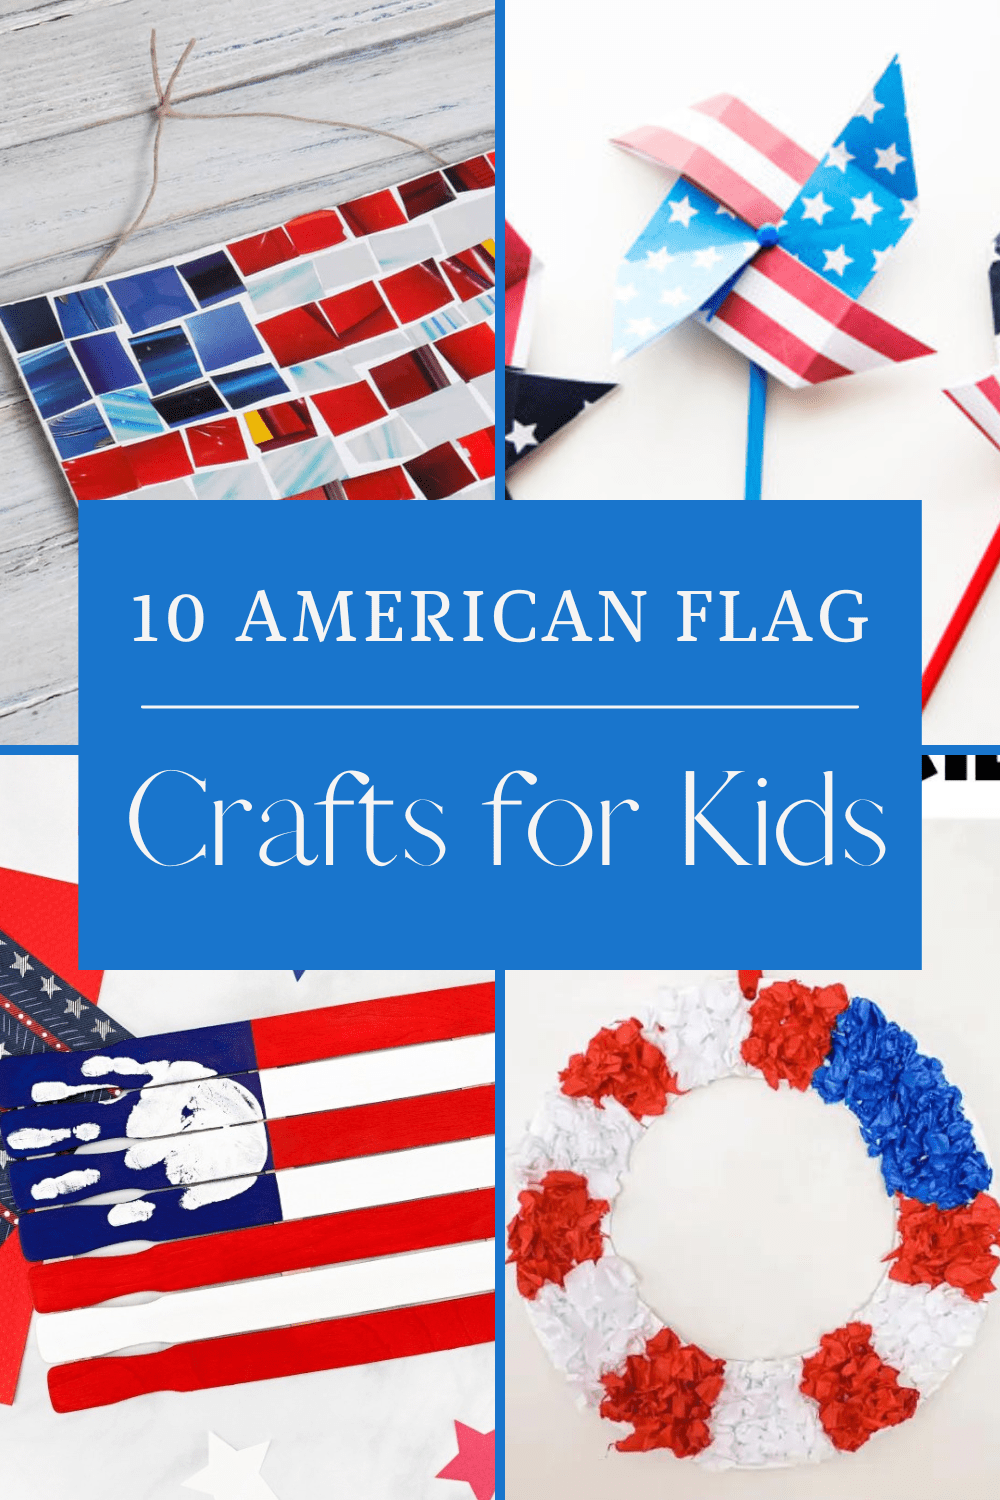 10 American Flag Crafts for Kids